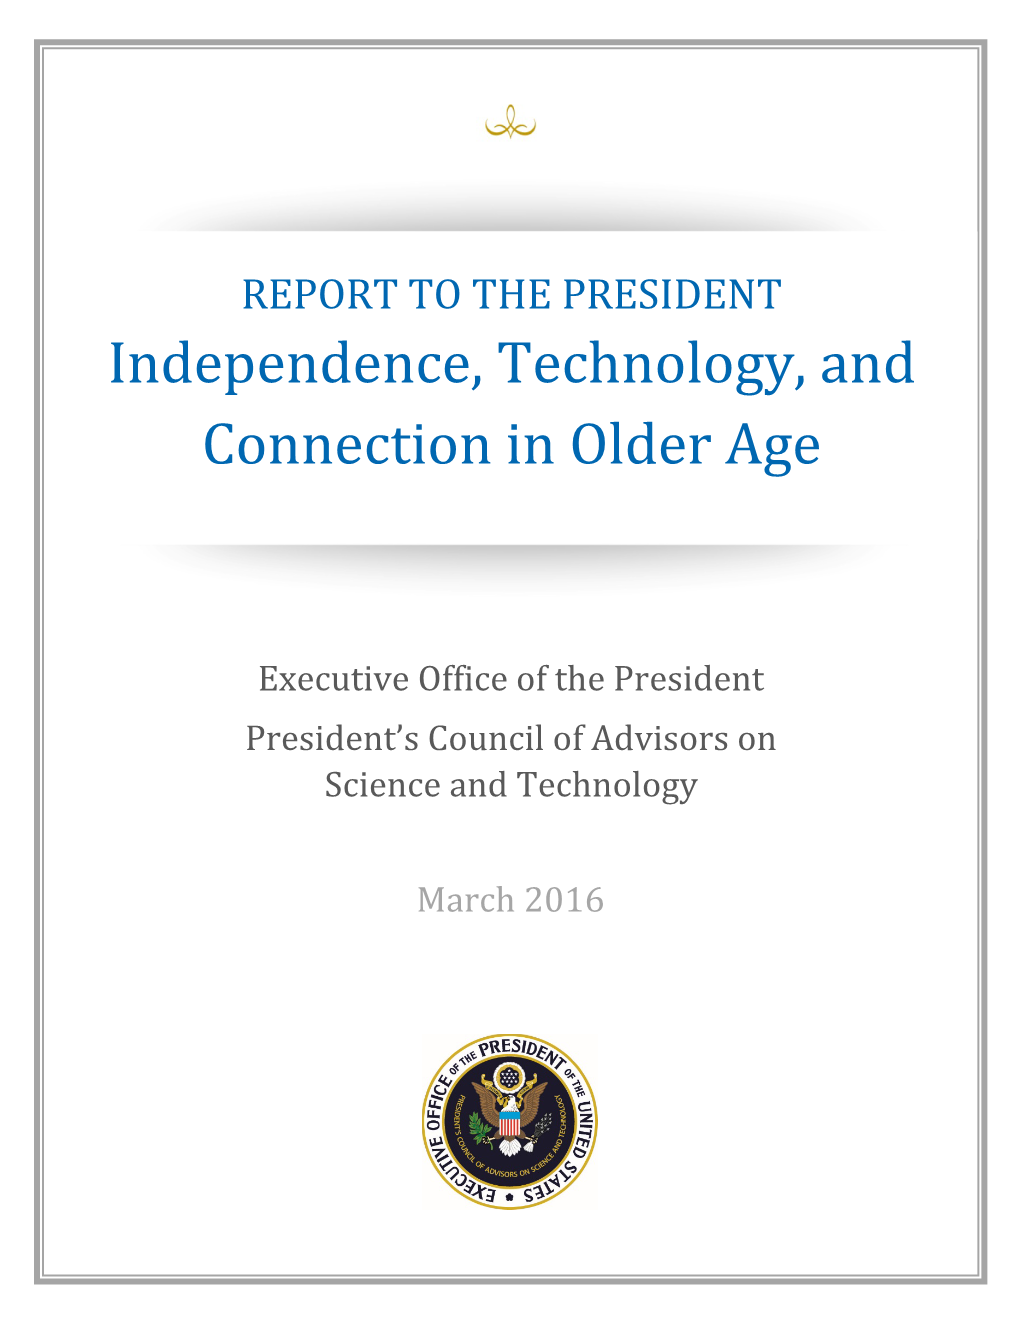 Independence, Technology, and Connection in Older Age